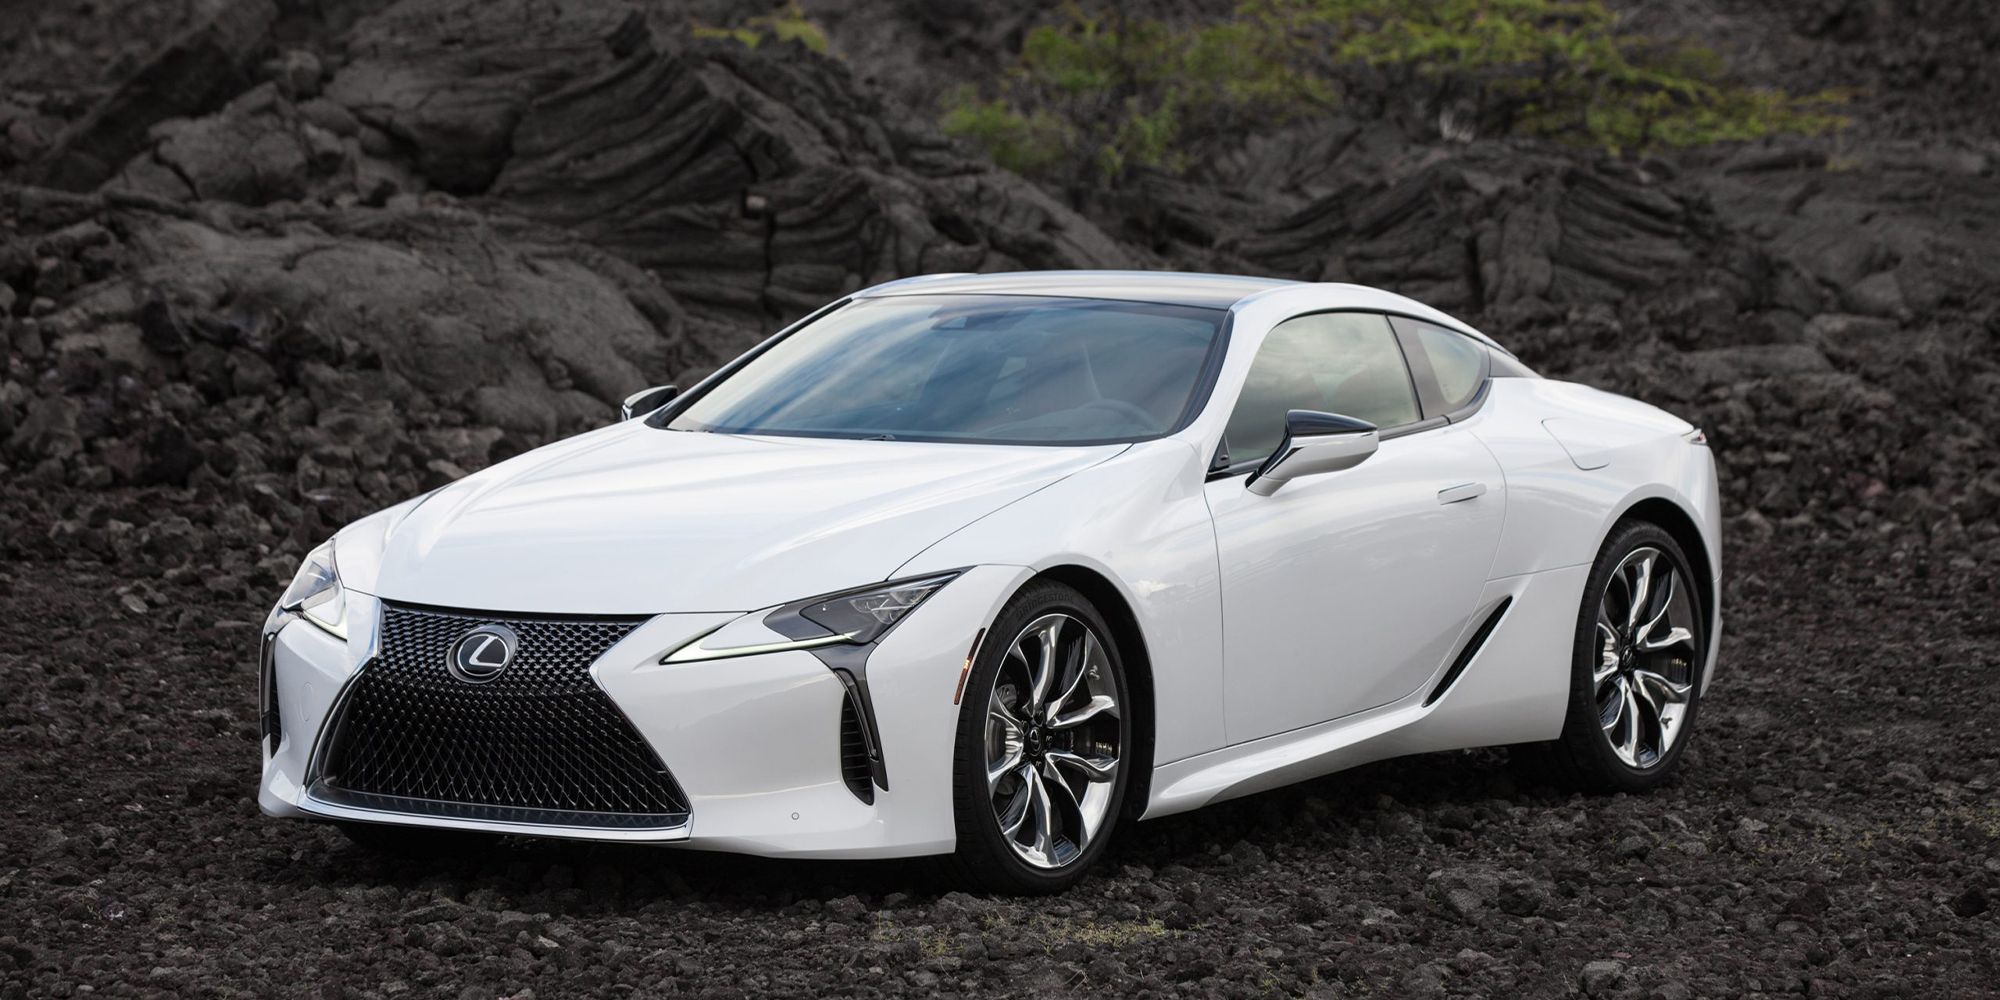 The front of a white Lexus LC